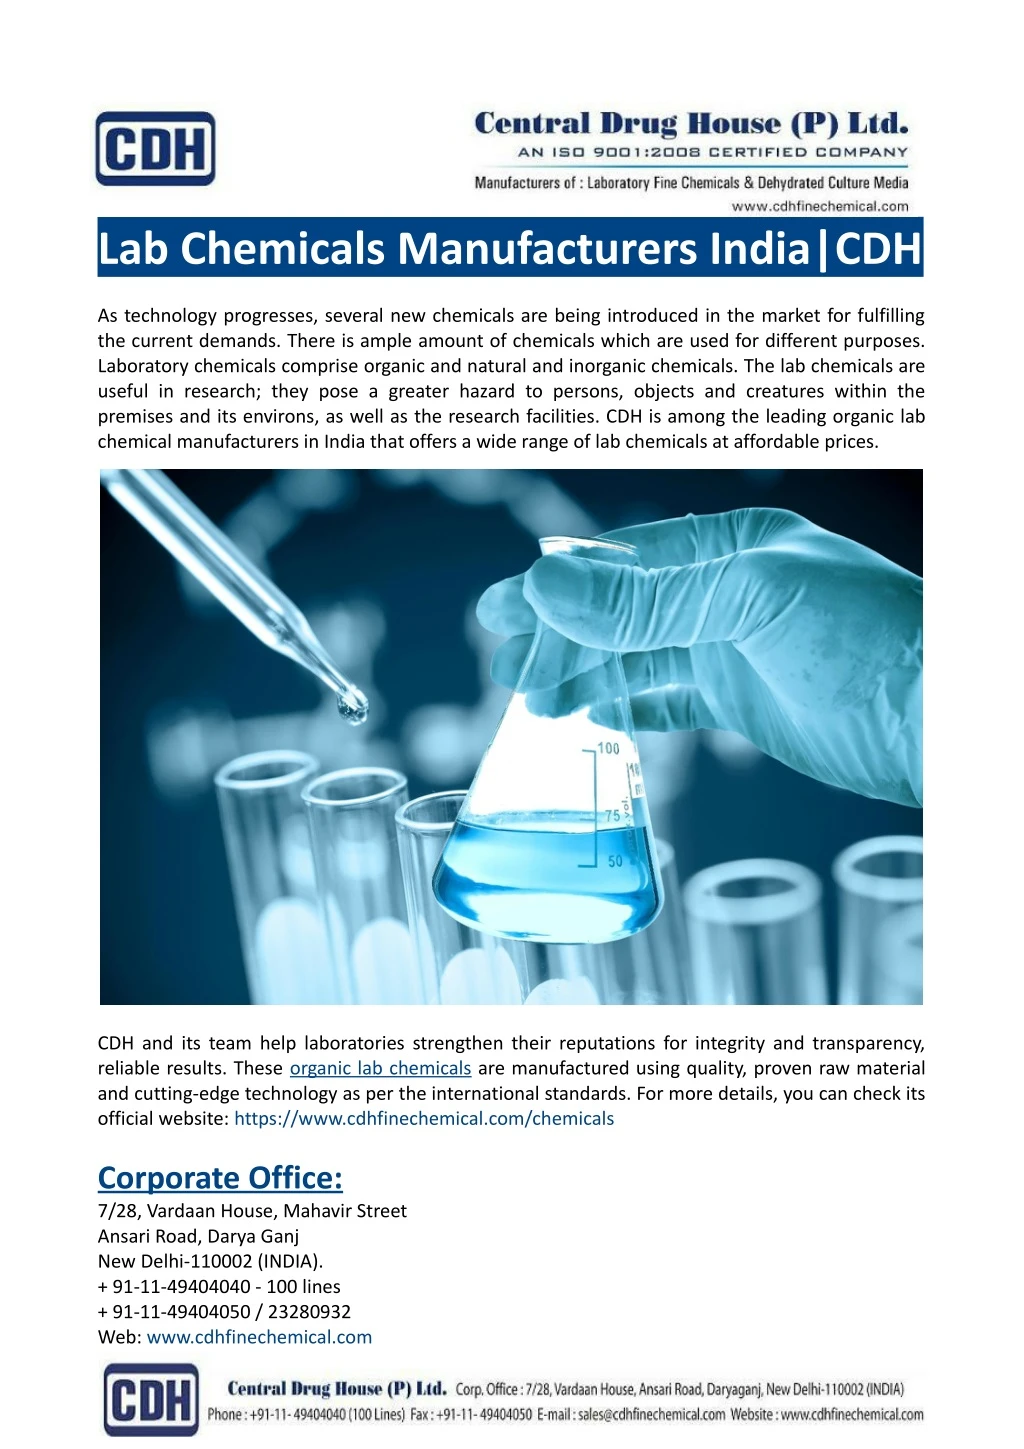 lab chemicals manufacturers india cdh